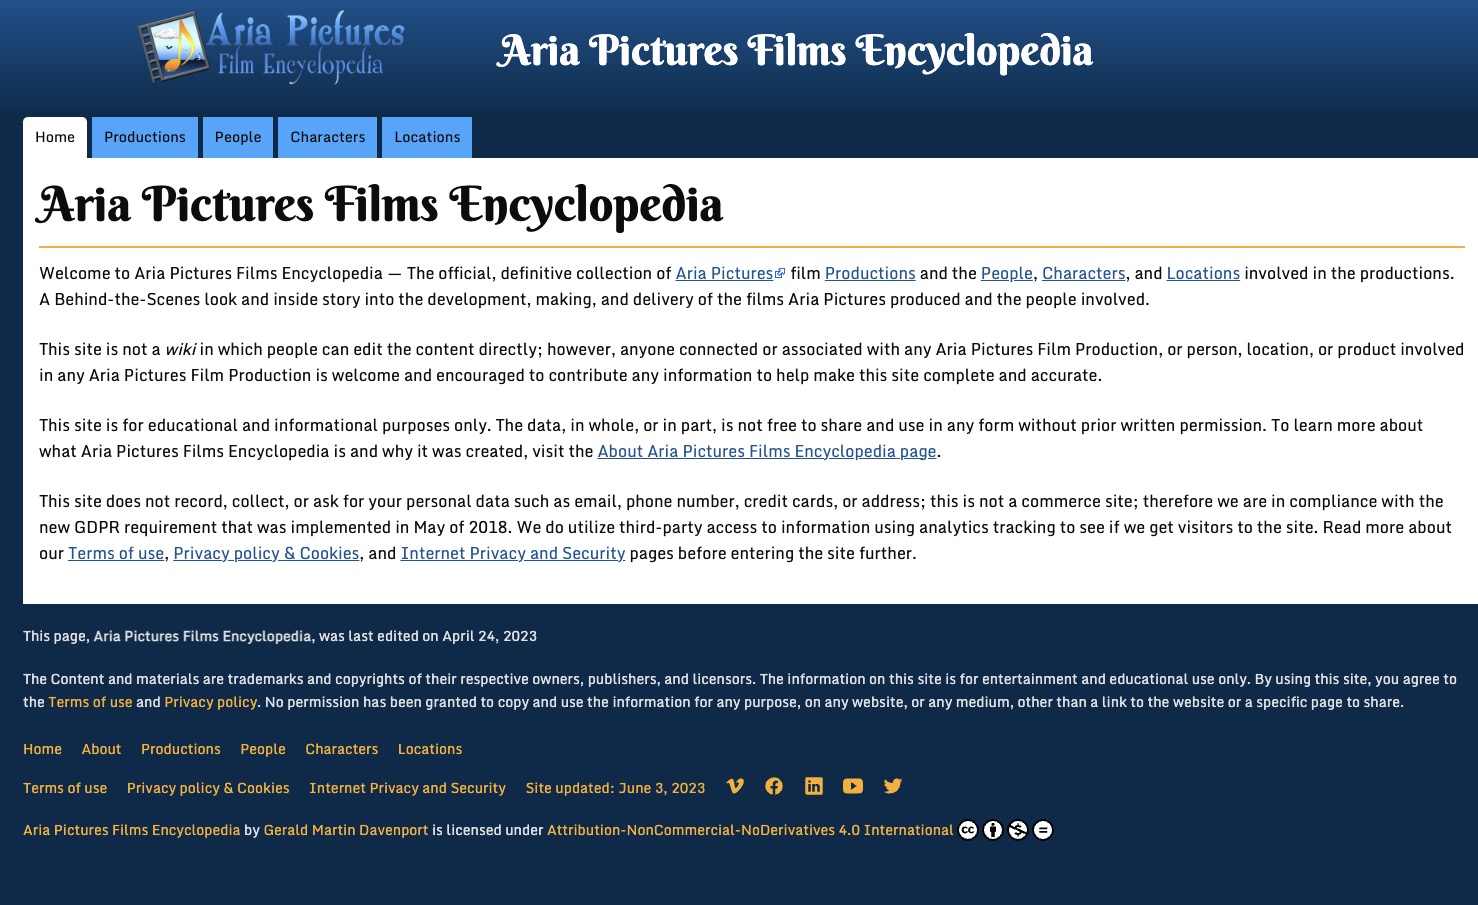 Aria Pictures Films Encyclopedia website.